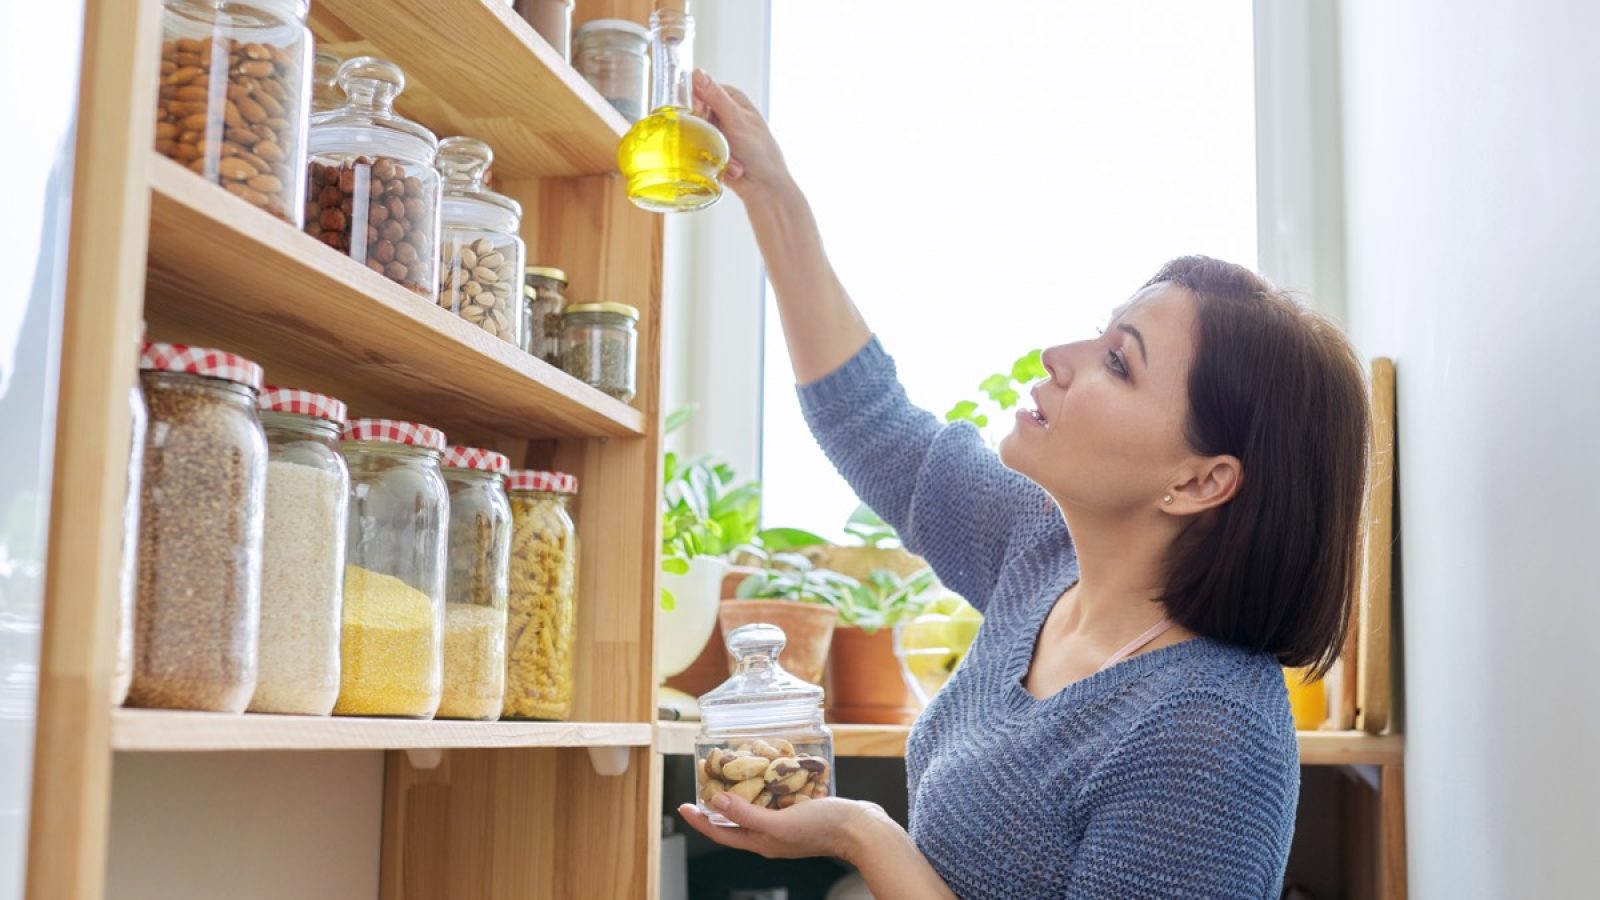 Never Store This Popular Kind of Oil in Your Pantry, Experts Warn